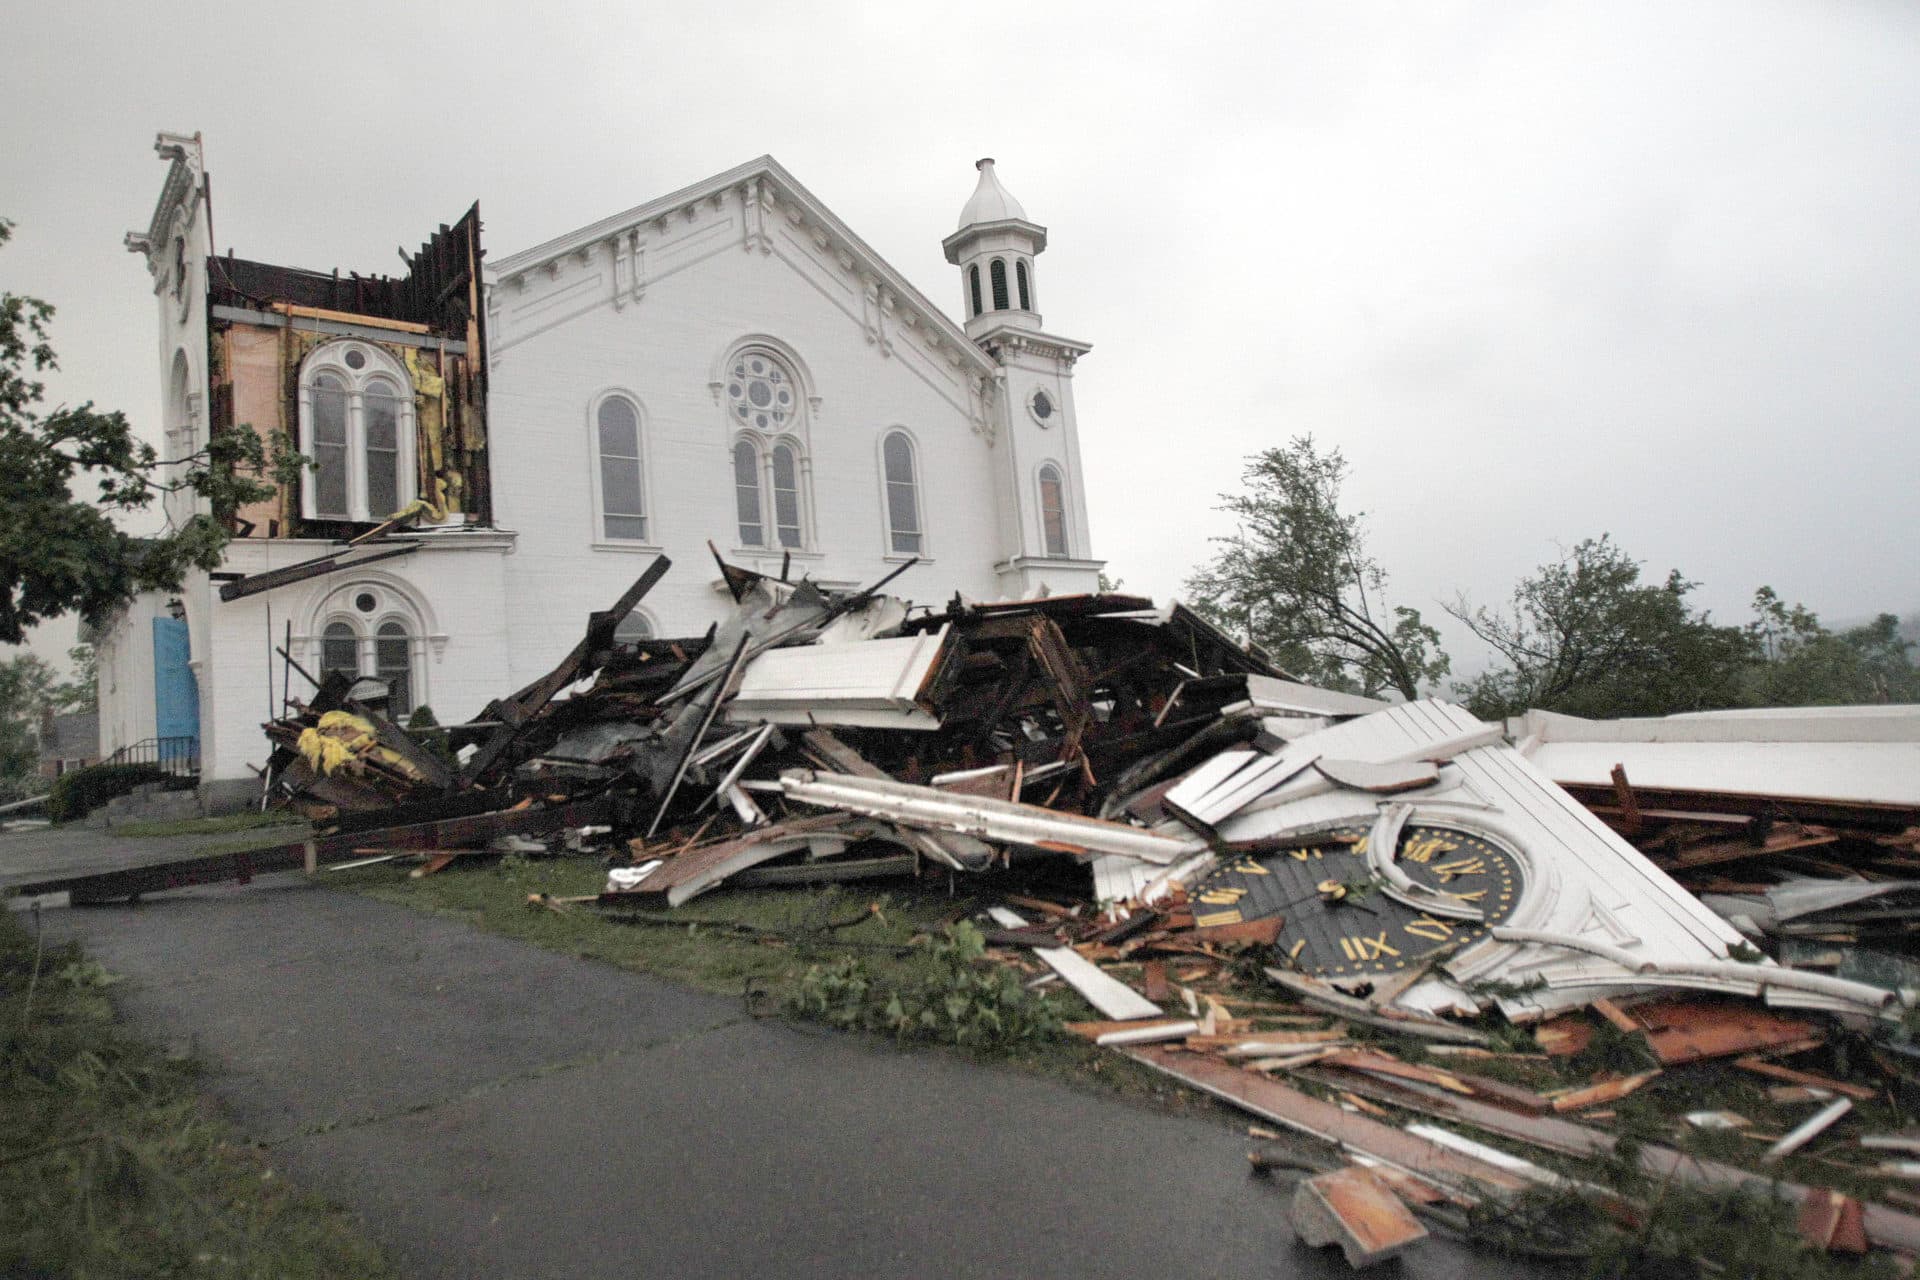 In this June 1, 2011 file photo, the steeple of The First Church of Monson, Mass., lies in rubble on the ground after a tornado blew through. (Elise Amendola/AP)